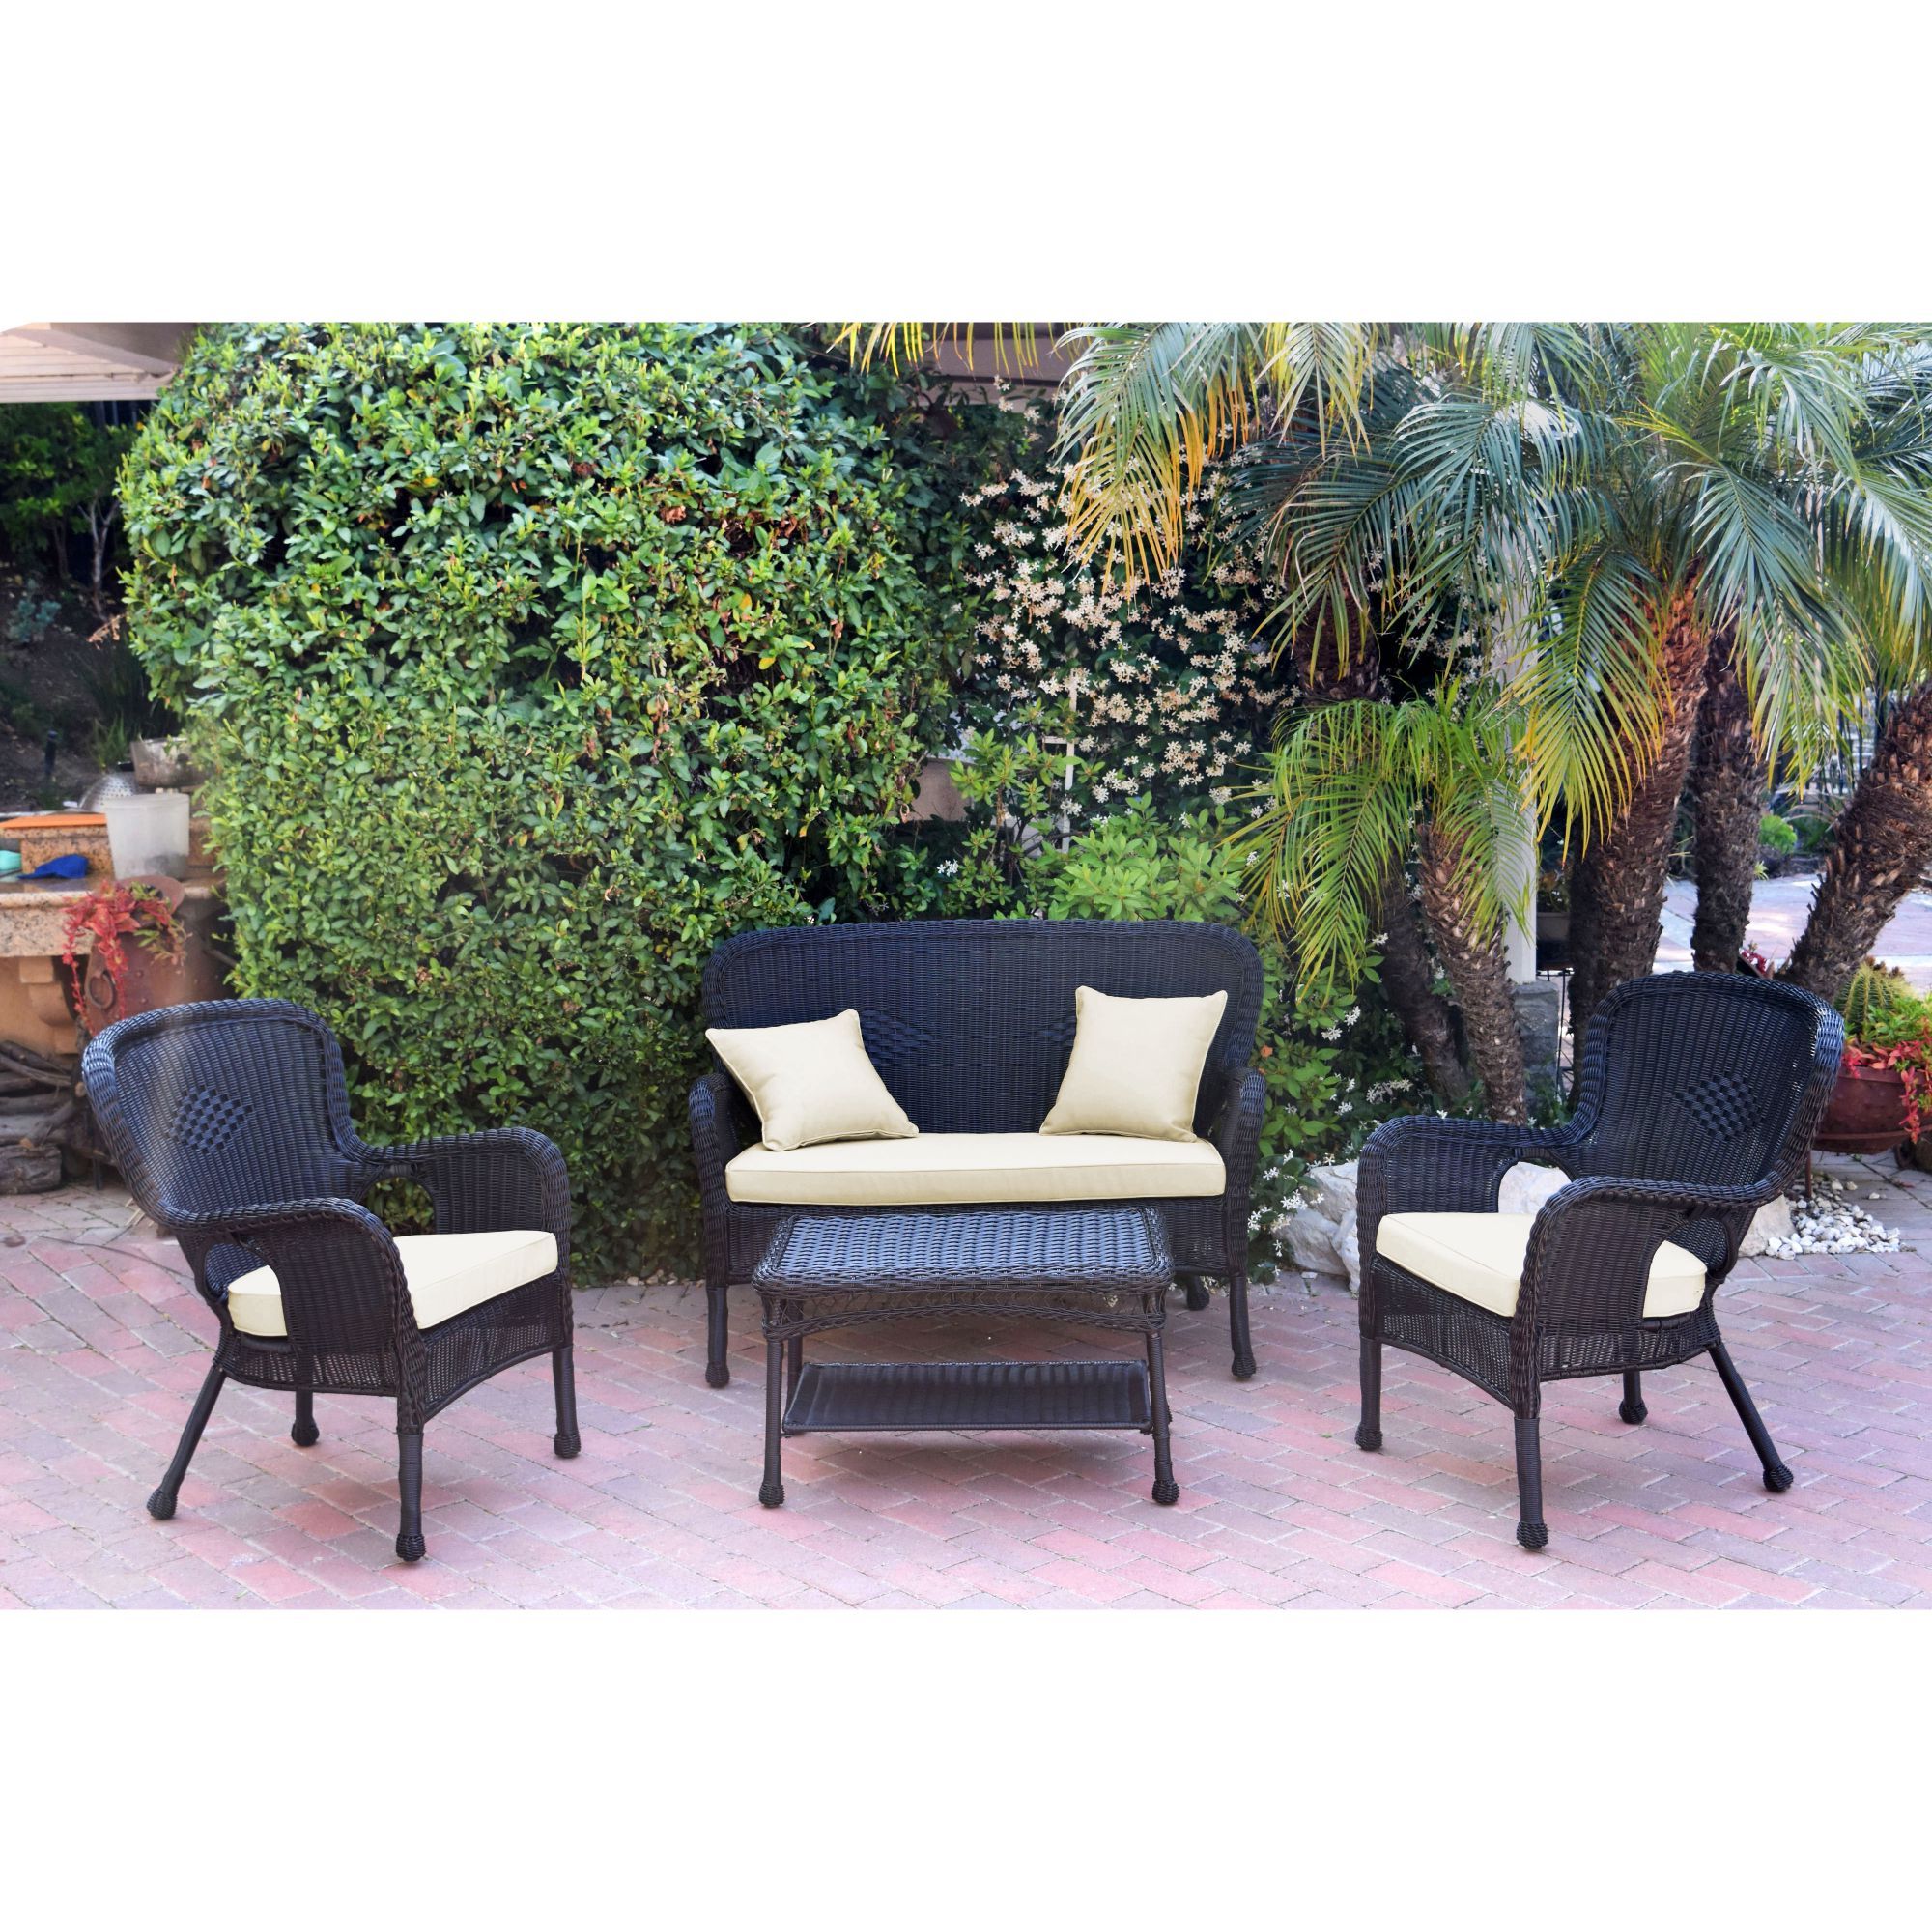 Newest 4 Piece Black Wicker Outdoor Furniture Patio Conversation Set – Ivory With Regard To Dark Brown Patio Chairs With Cushions (View 2 of 15)